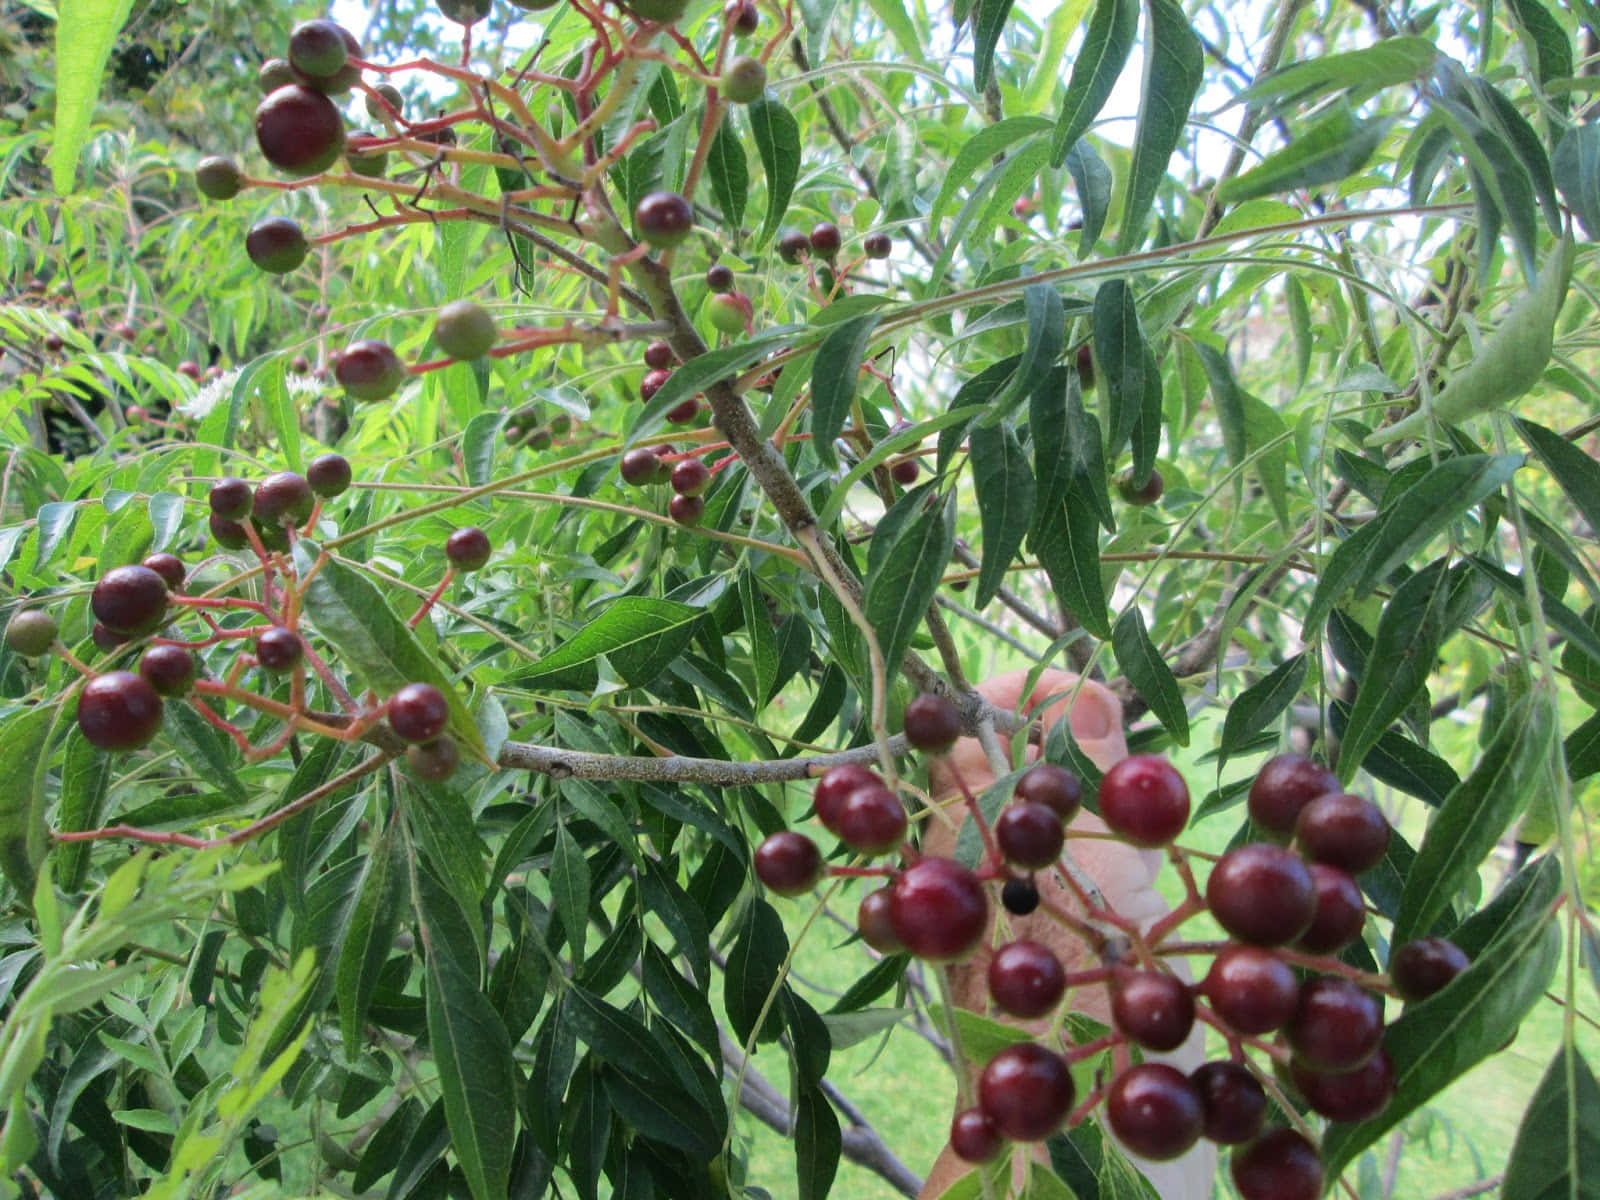 "Ripe Curry Berries Freshly Harvested from the Curry Berry Tree" Wallpaper